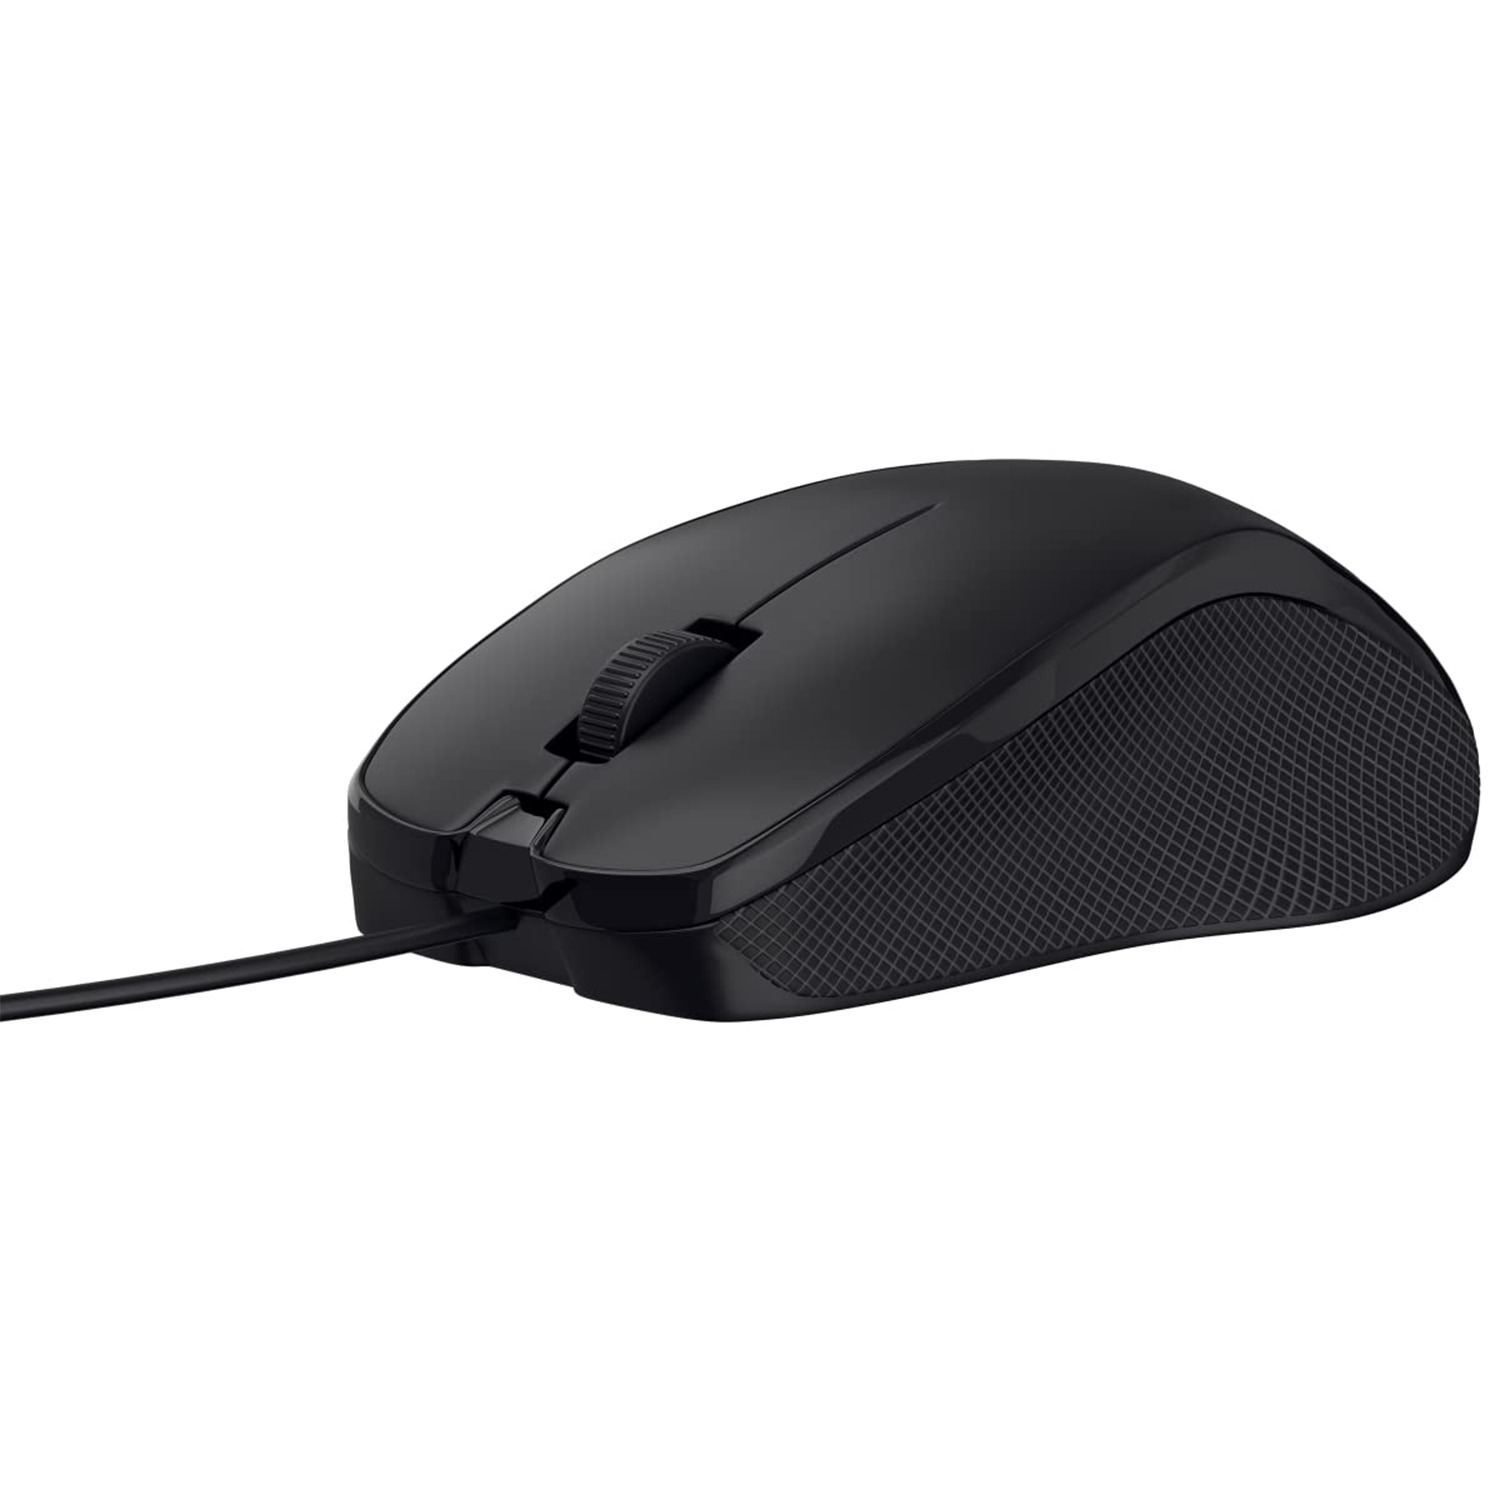 Portronics Toad 101 Wired Optical Mouse with 1200 DPI, Plug & Play, Hi-Optical Tracking, 1.25M Cable Length, 30 Million Click Life(Black)